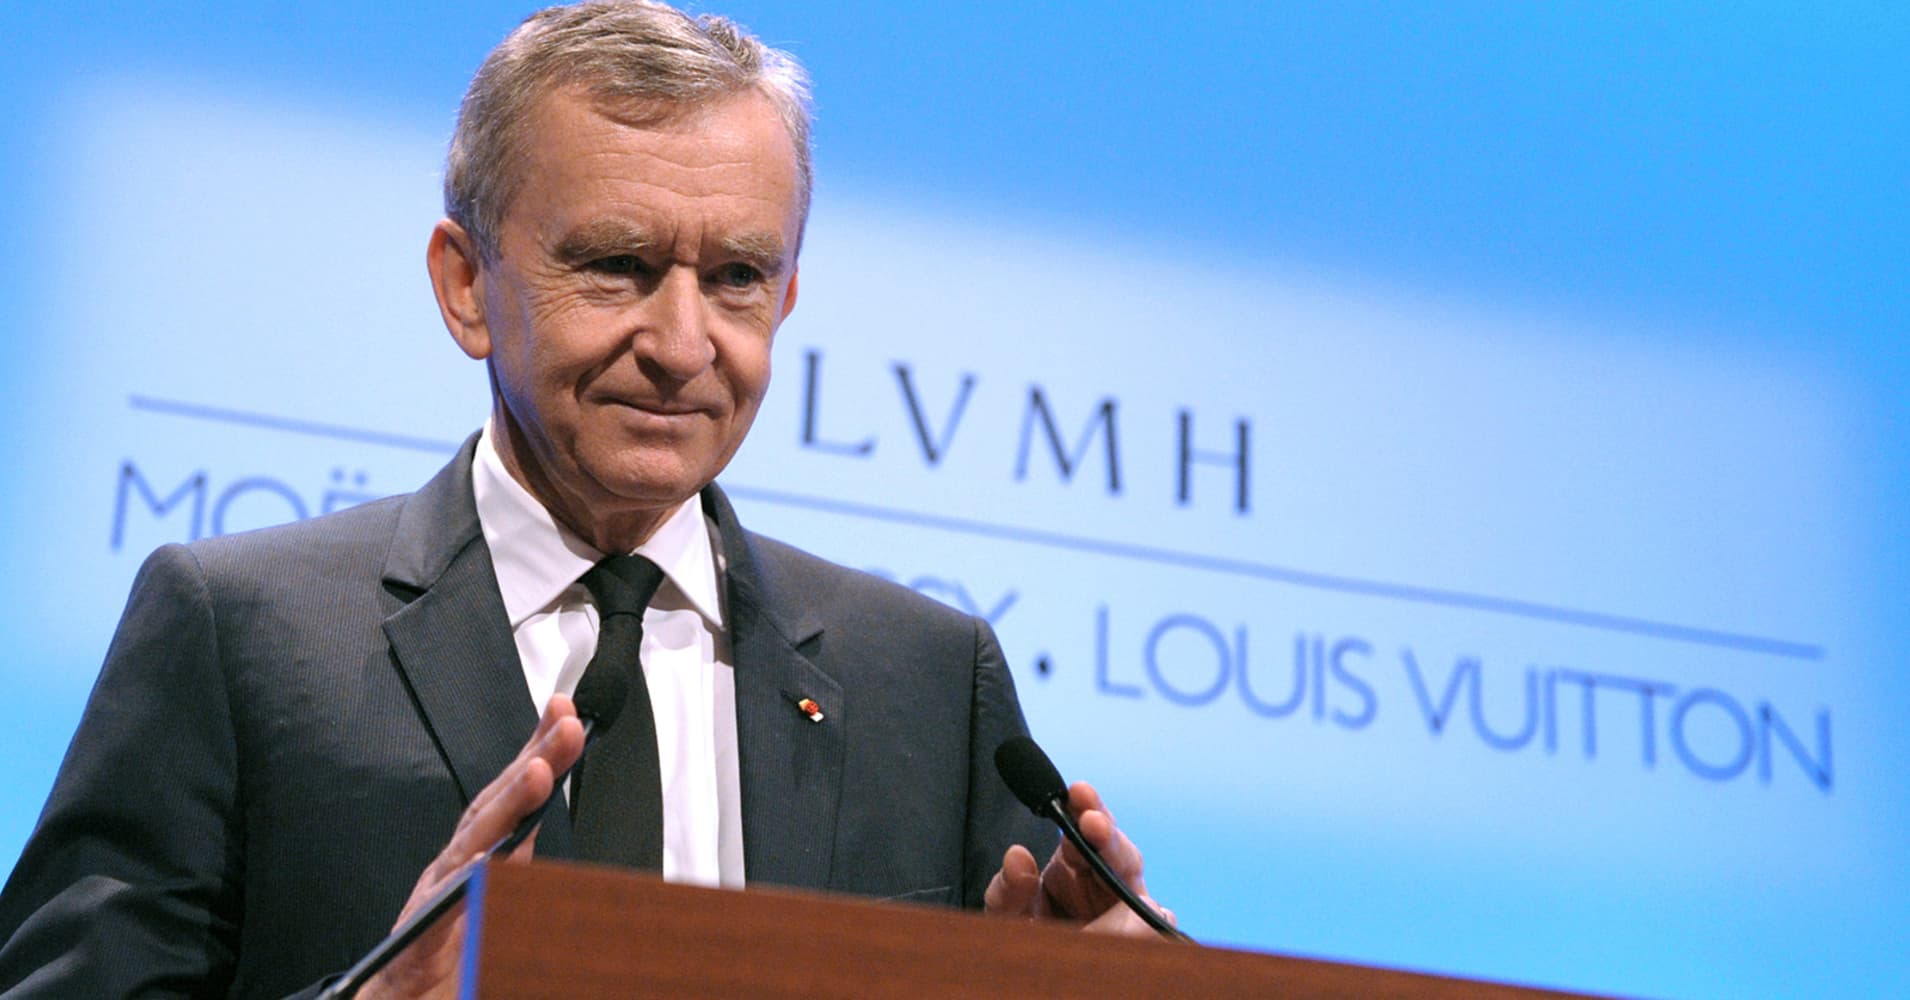 LVMH’s Arnault rules out Le Pen victory in France